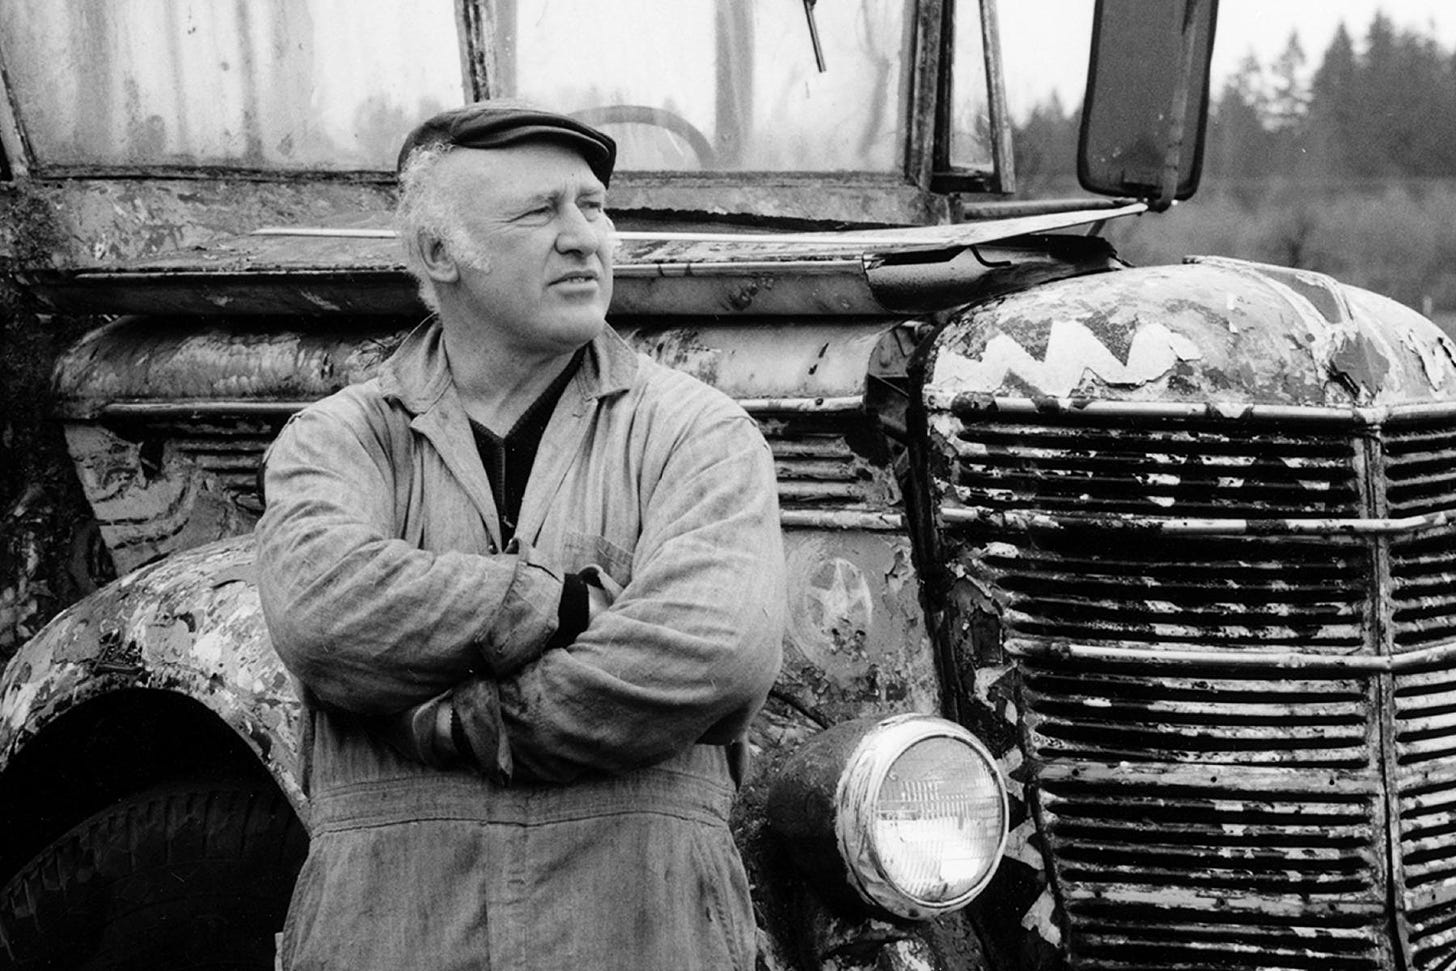 Ken Kesey in black and white